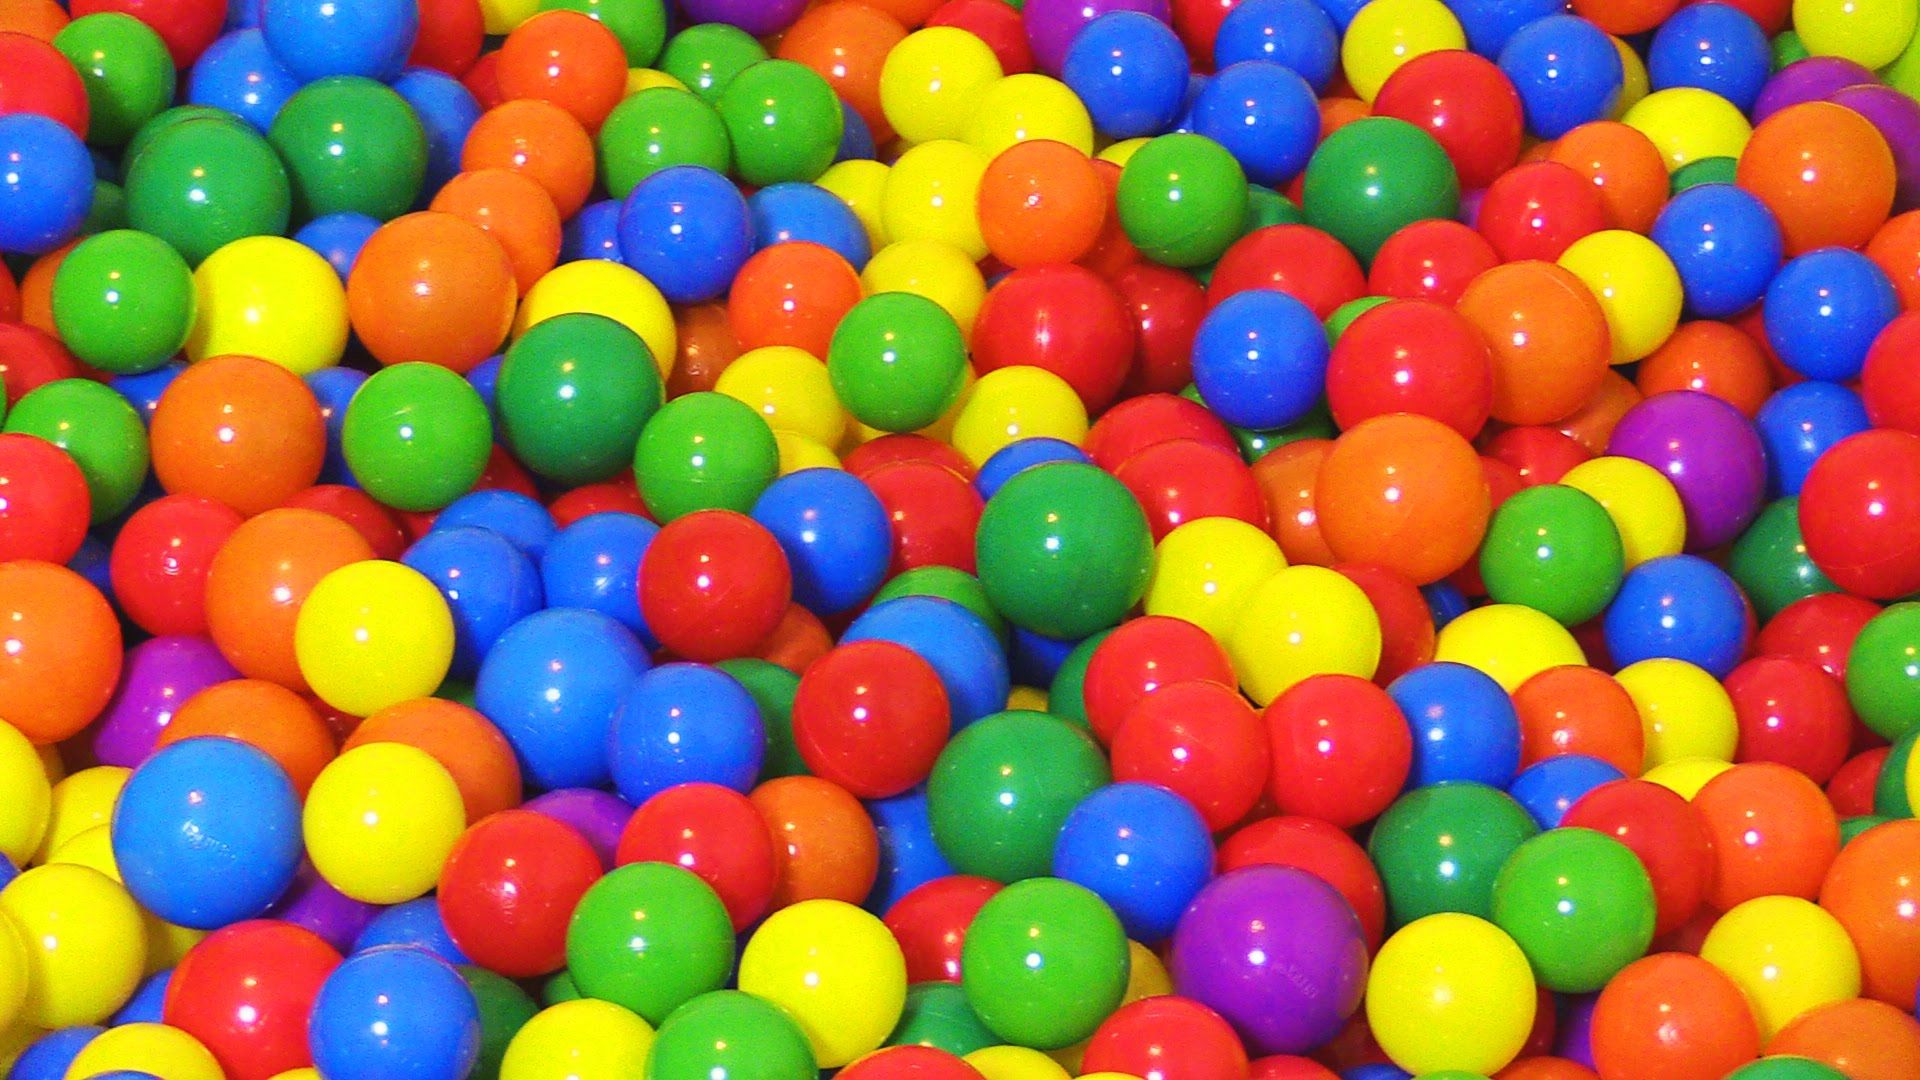 The Ball Pit Show for learning colors - children's educational video. Ball pit, Kids ball pit, Learning colors